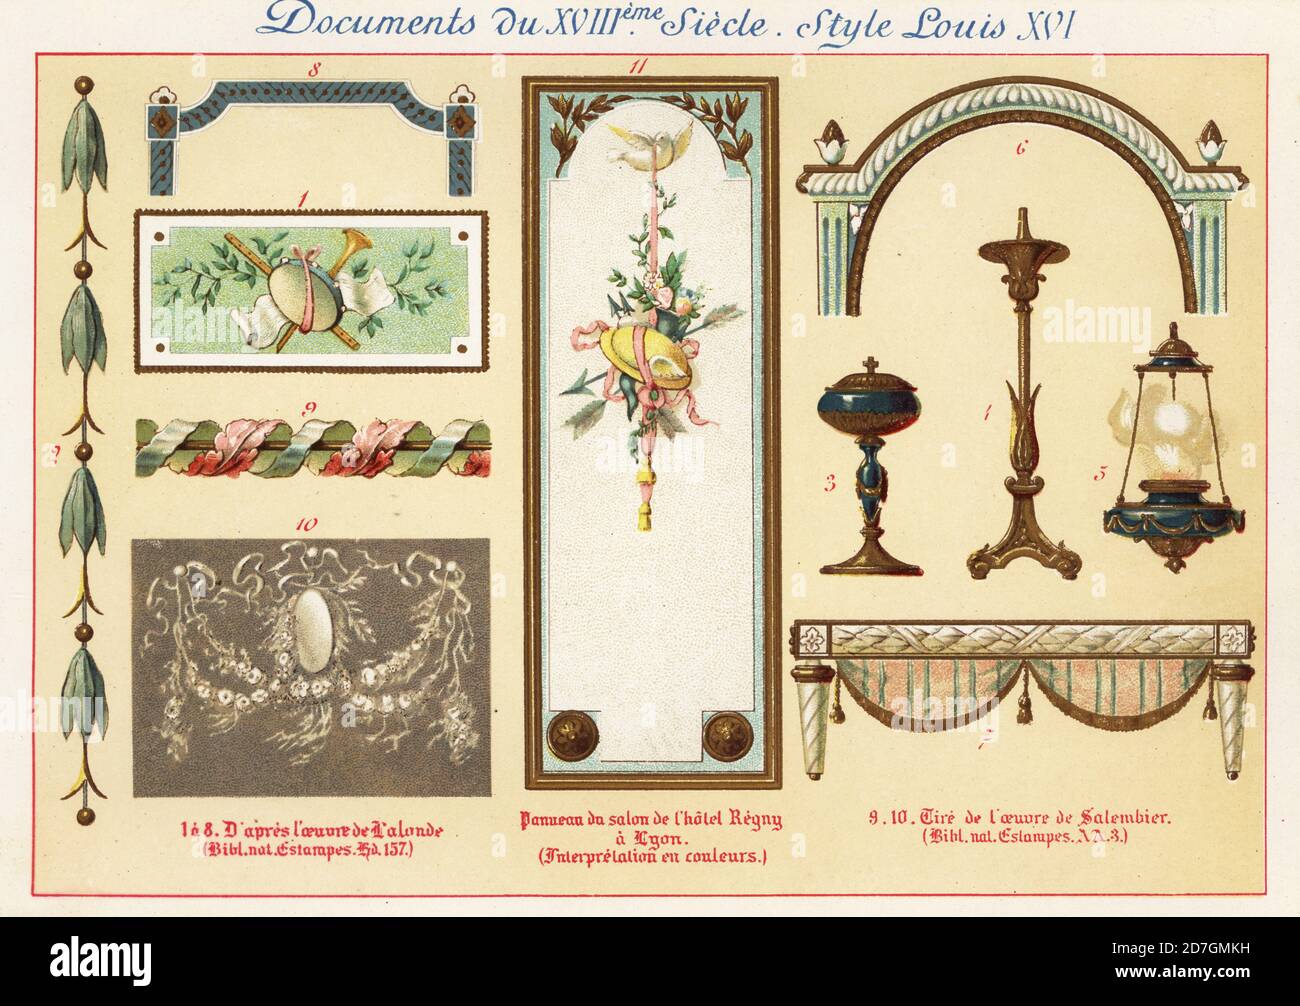 Design elements from the era of King Louis XVI, 18th century. 1,8 after Richard de Lalonde, 9,10 after Henri Salembier, panel from a room in Hotel Regny at Lyon. Chromolithograph designed and lithographed by Ernst Guillot from Elements d'Ornementation du XVIIIe Siecle, Elements of Ornament of the 18th century, Renouard, Paris, 1890. Stock Photo